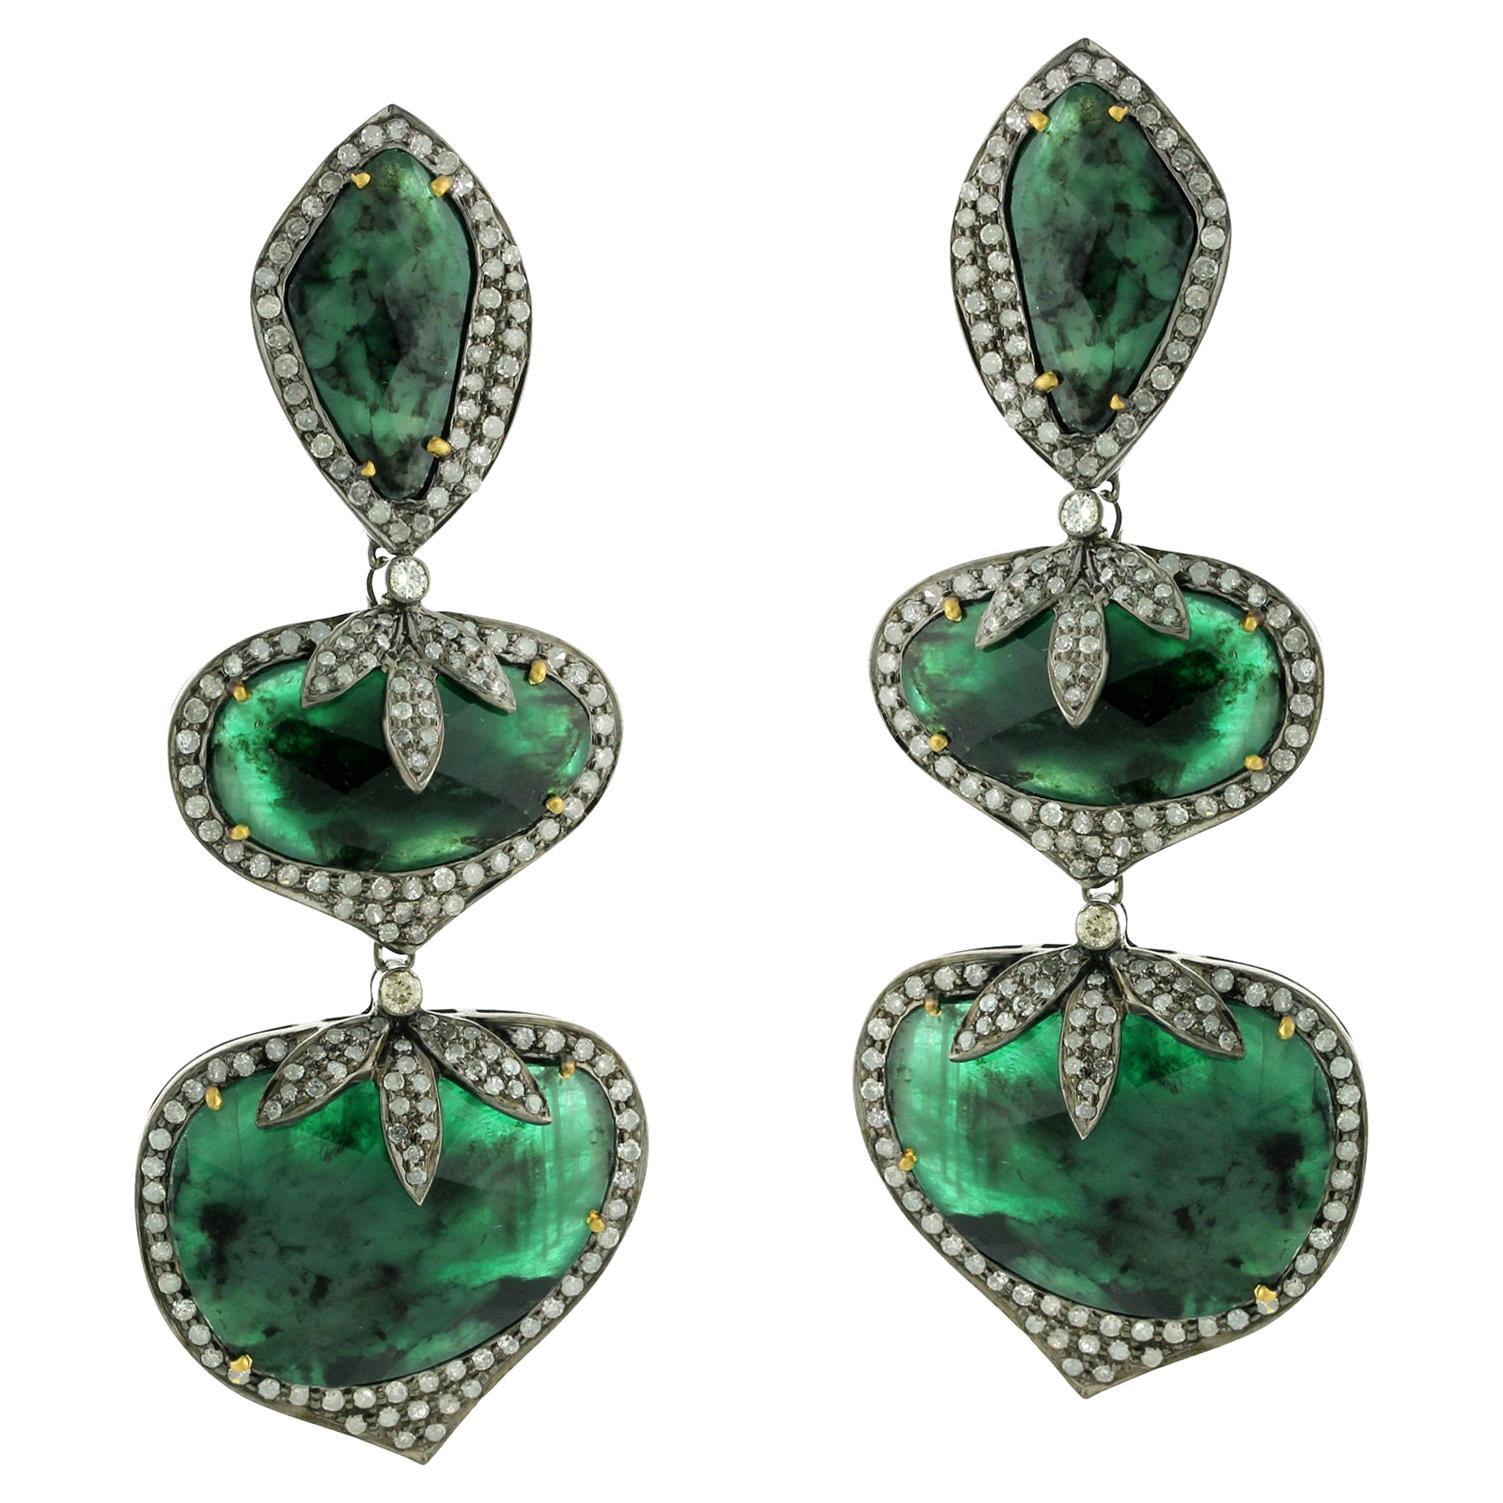 45.8ct Vivid Green Emerald 3 Tier Dangle Earrings With Diamond In 18k White Gold For Sale